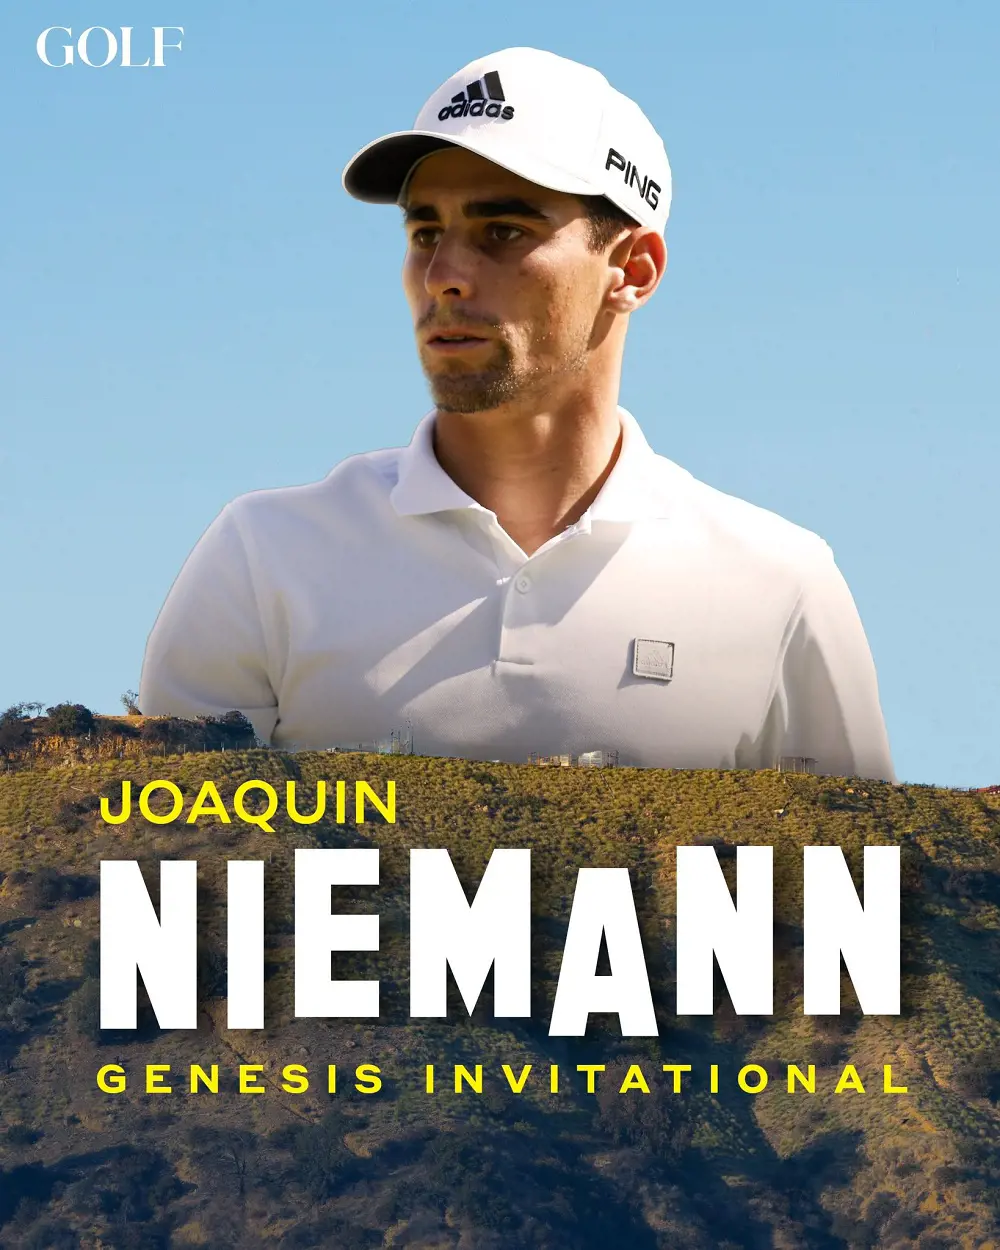 The 24-year-old Joaquin is the youngest player to win the Genesis Invitational.